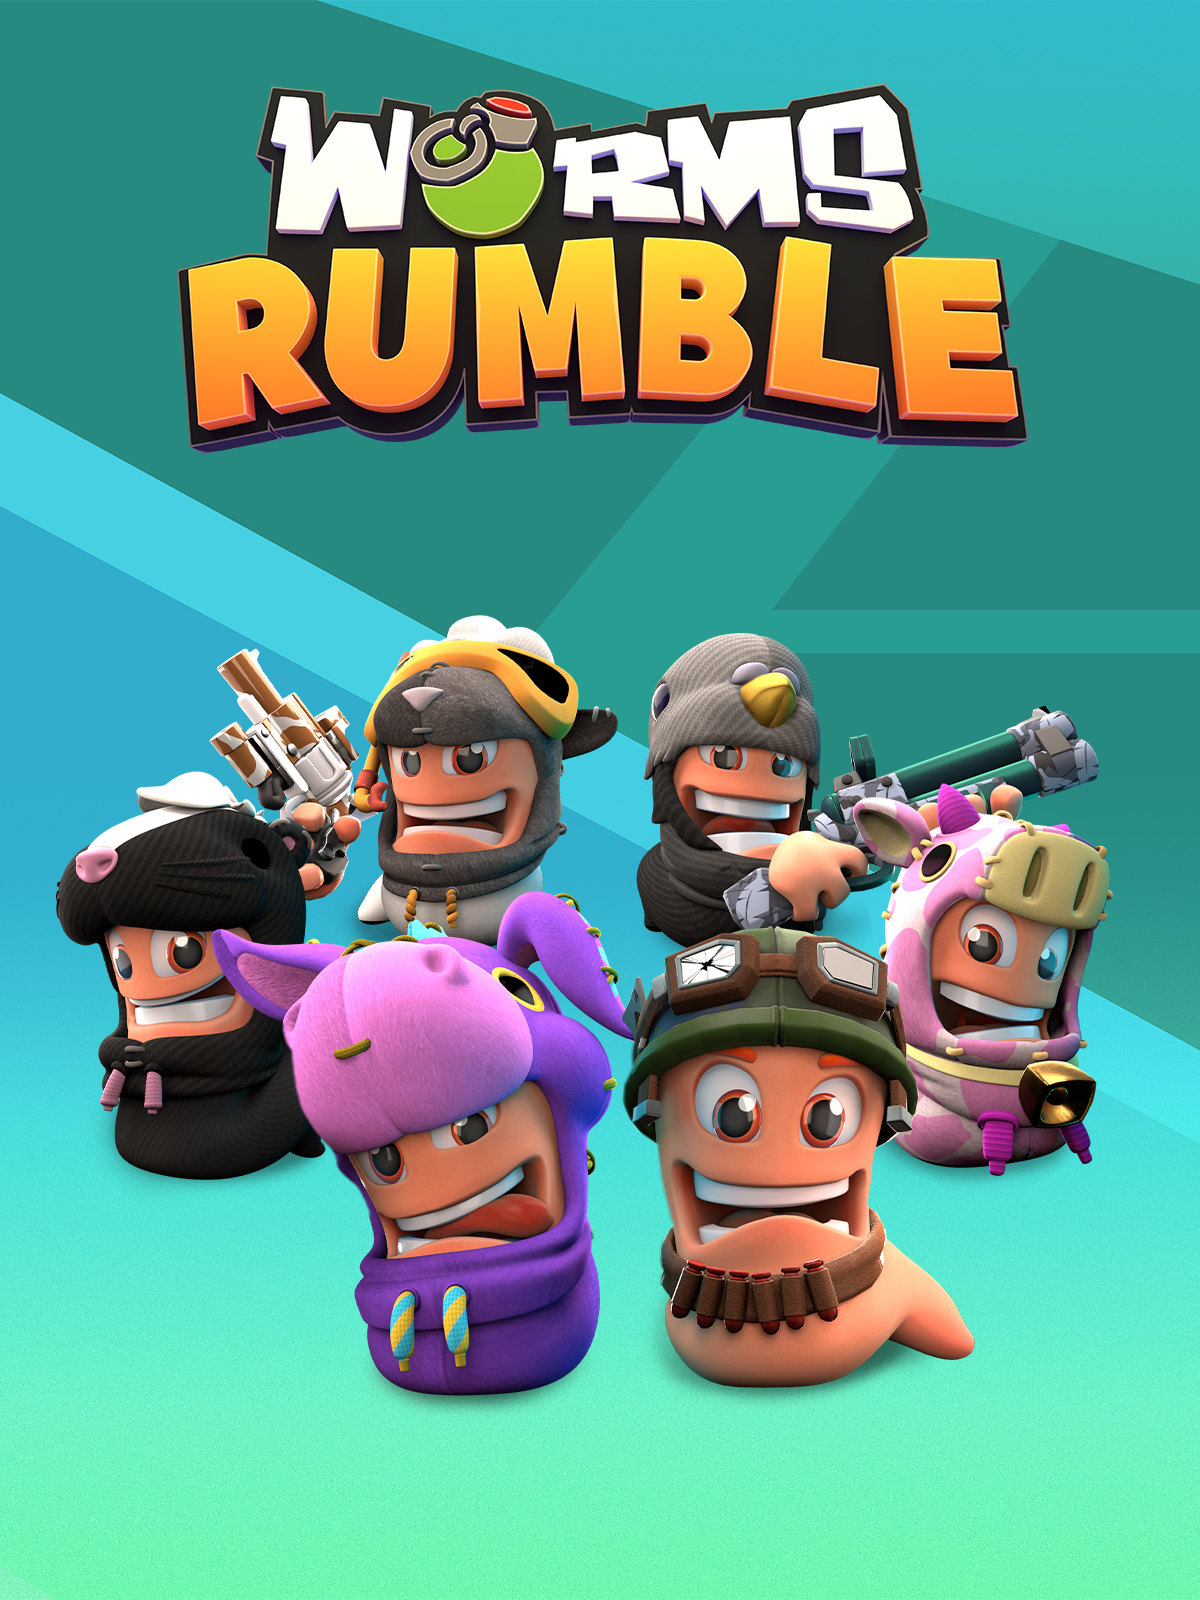 Worms Rumble - Legends Pack (DLC)